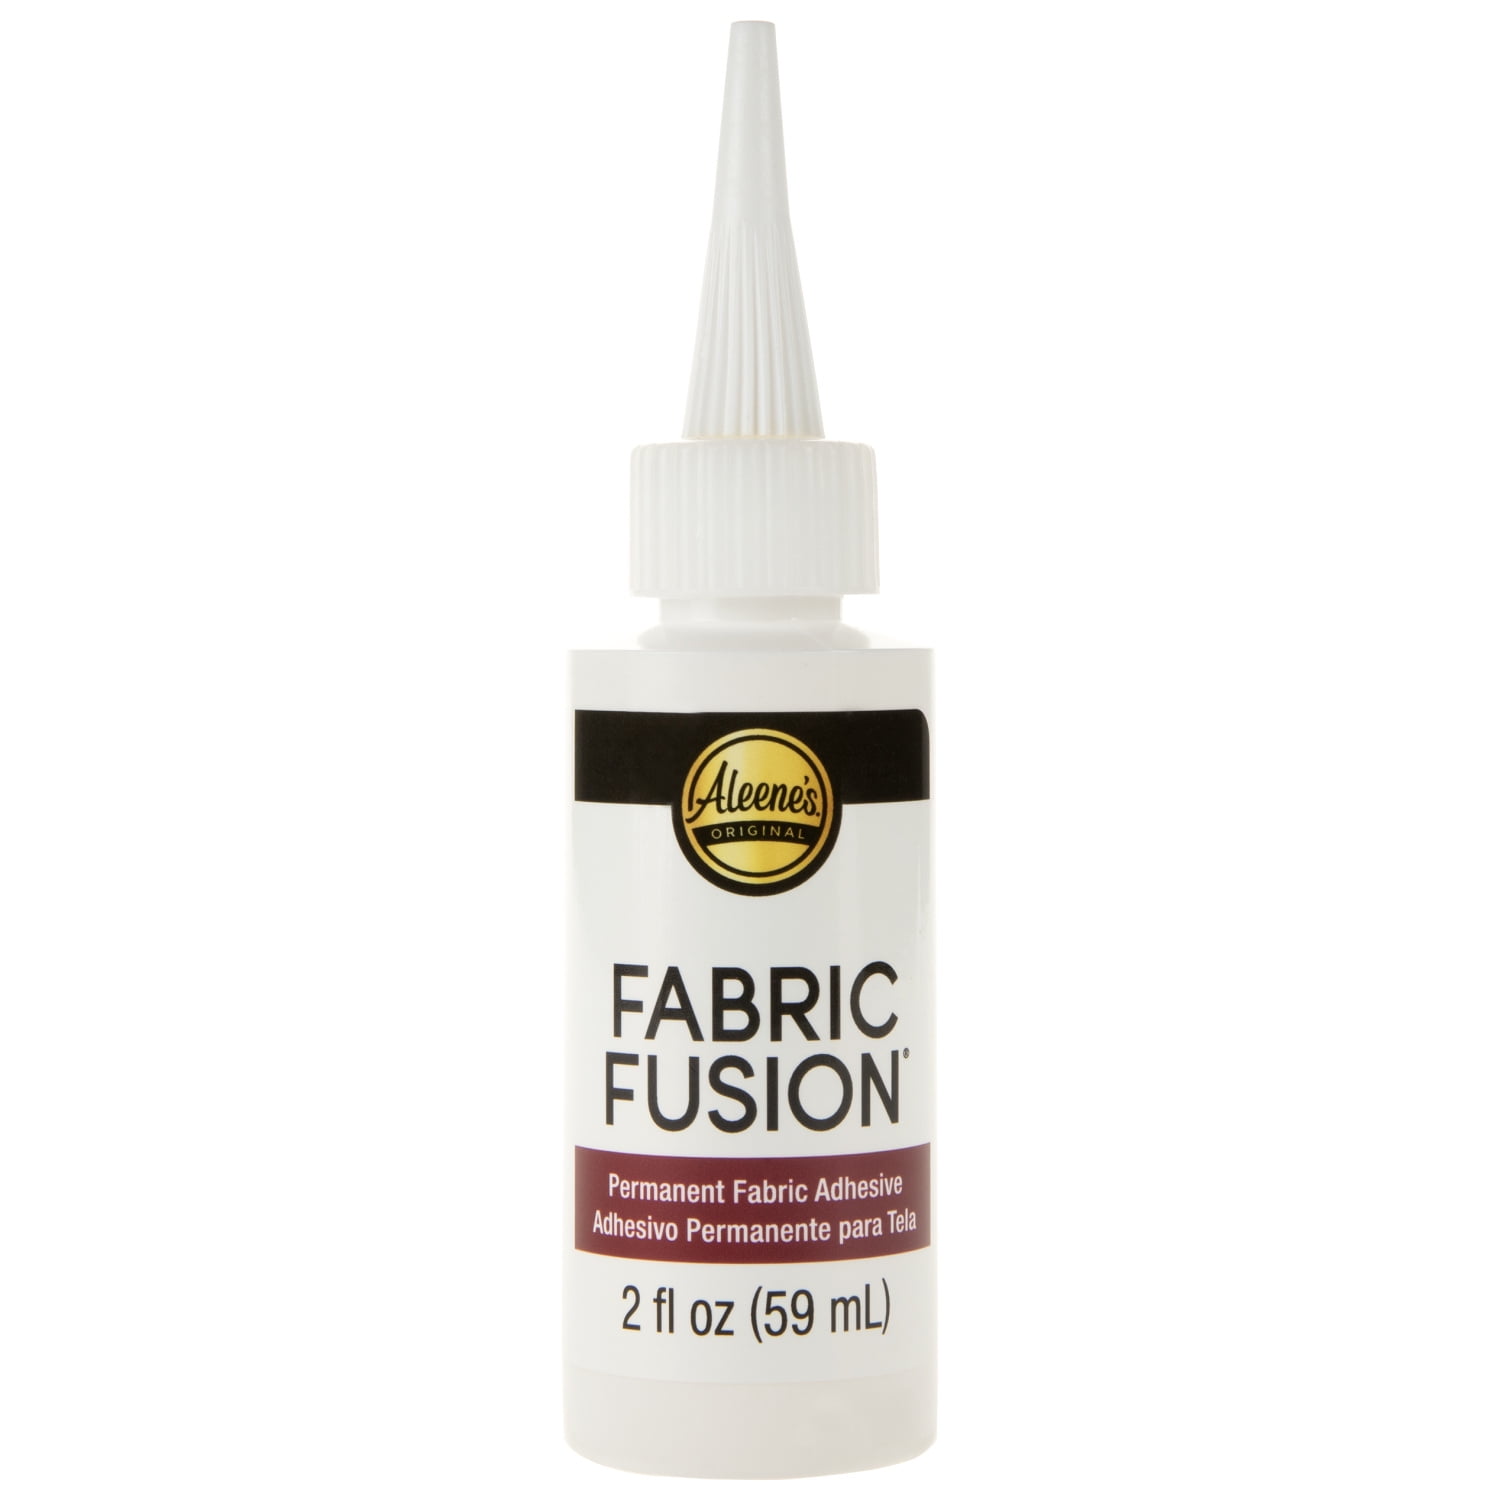 Fabric Fusion Fabric Glue Permanent Clear Washable 4oz for Patches, Rug  Glue, Clothing Glue, No Sew Fabric Glue with Pixiss Art Dotting Stylus Pens  5 pcs Set